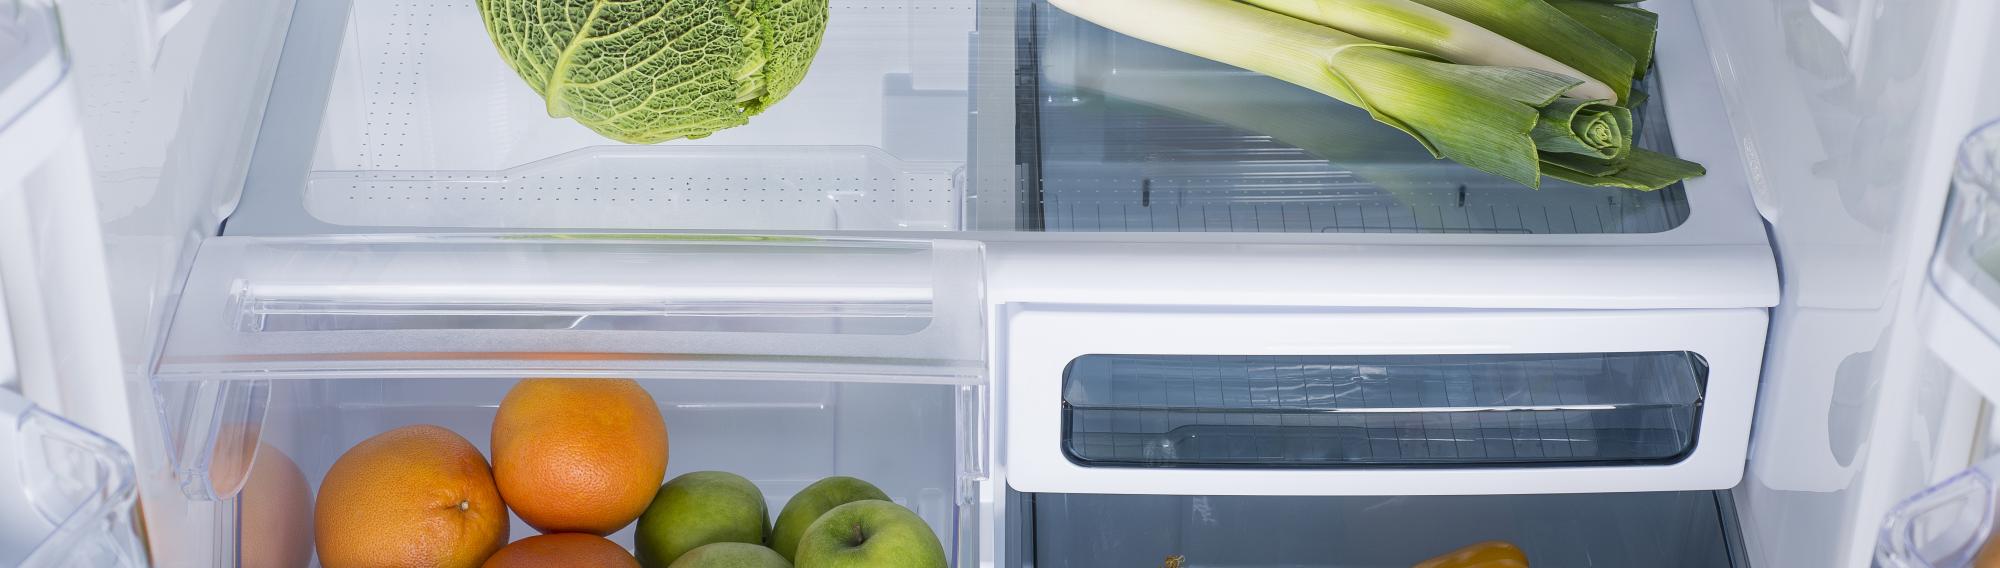 Image of an affordable refrigerator from Superior Rent to Own